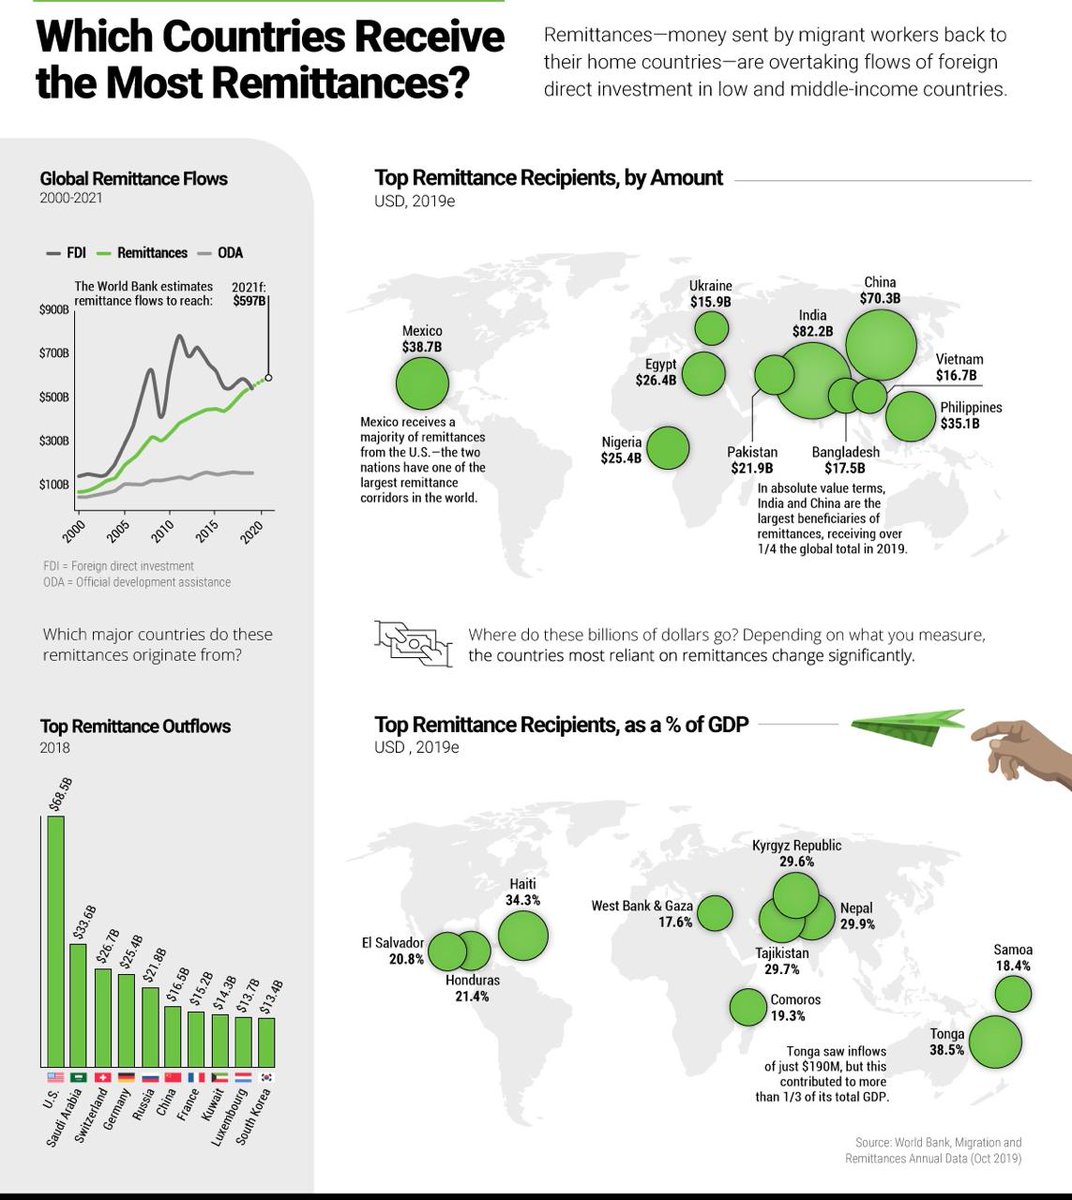 This chart underscores the importance of remittances to india. Remittances continues to be higher than FDI flows in India.